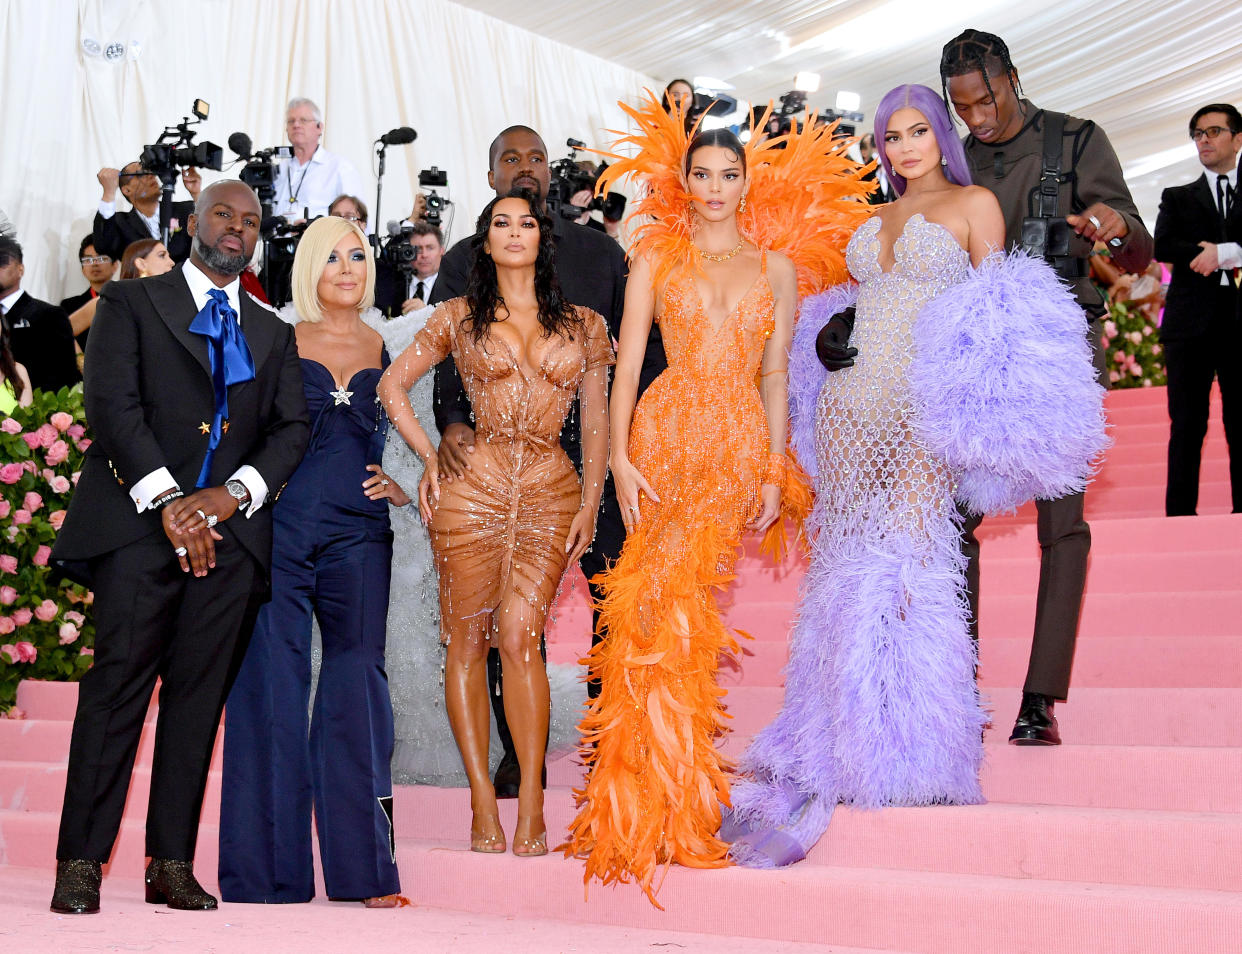 Corey Gamble, Kris Jenner, Kanye West, Kim Kardashian West, Kendall Jenner, Kylie Jenner and Travis Scott attend The 2019 Met Gala Celebrating Camp: Notes on Fashion at Metropolitan Museum of Art on May 06, 2019 in New York City.  / Credit: Photo by Dia Dipasupil/FilmMagic